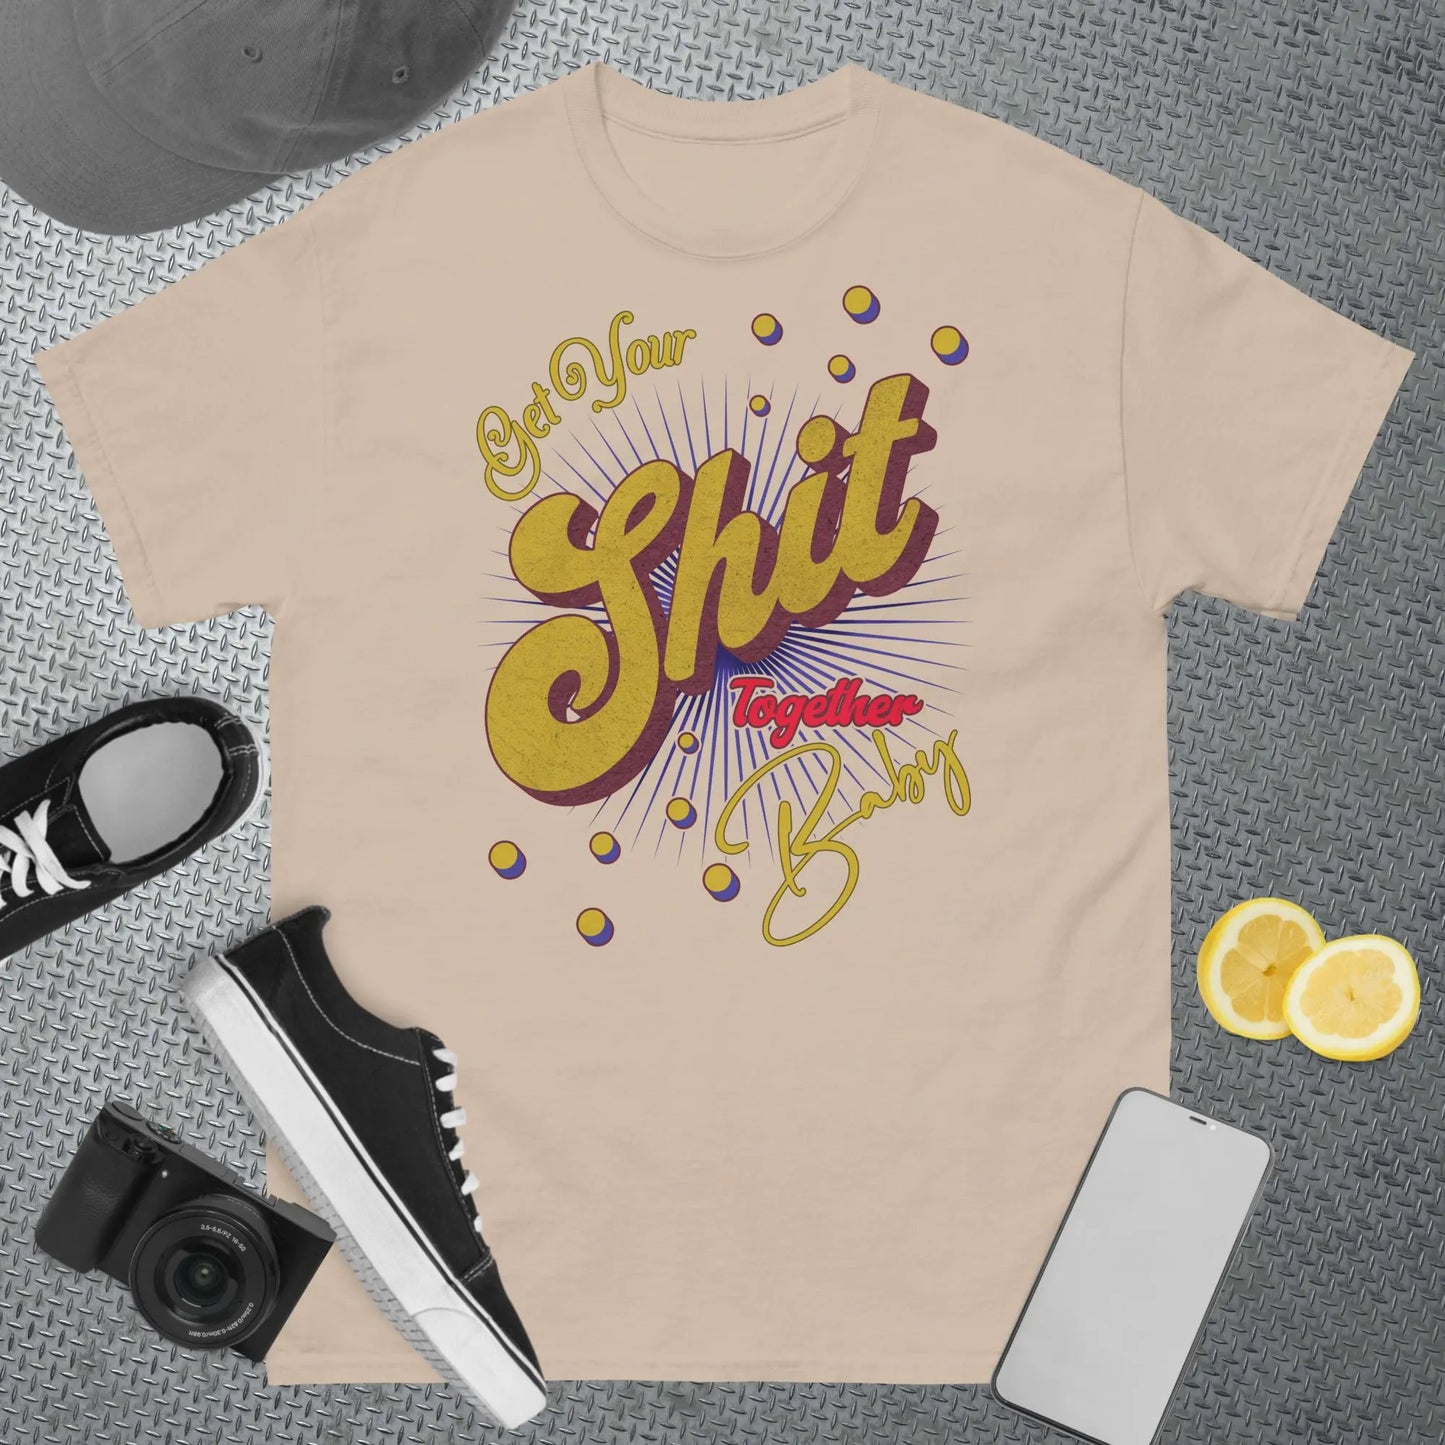 Get Your Shit Together Men's Classic t-shirt by BC Ink Works - BC Ink Works